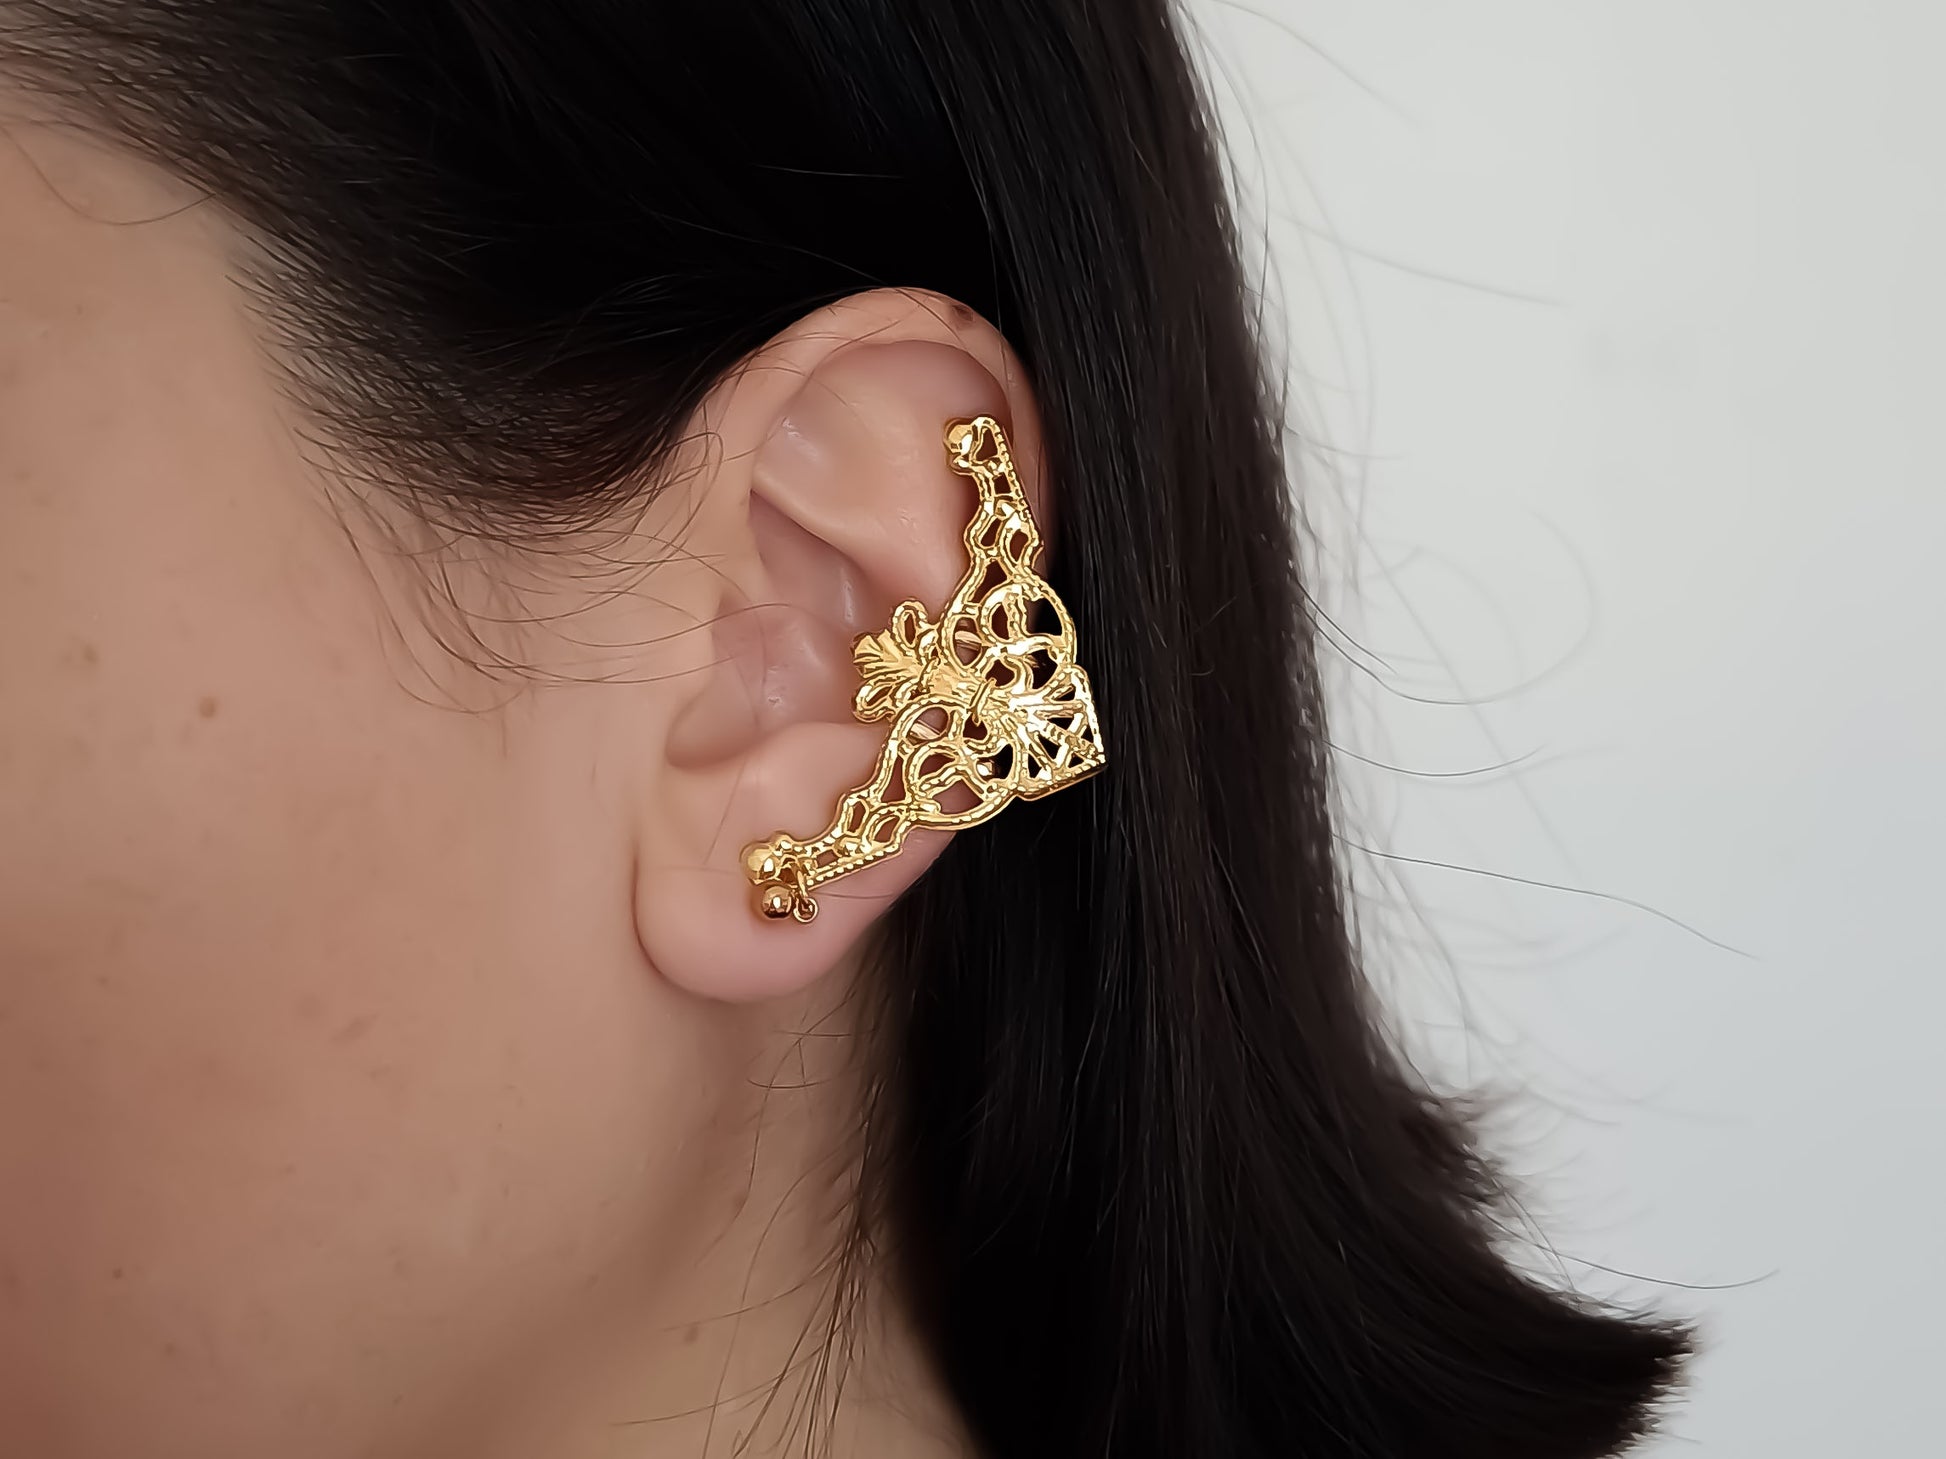 A close-up view of a model wearing Myril Jewels' gold cuff earrings, which are masterfully crafted in a rich gold tone. The detailed filigree design evokes a neo-gothic aesthetic, perfect for those who desire a touch of dark-avantgarde elegance. These gold earrings are ideal for gothic-chic fashion lovers, adding a unique statement to both everyday wear and special occasions like Halloween, and are versatile enough for festival adornment or as part of a minimal goth wardrobe.